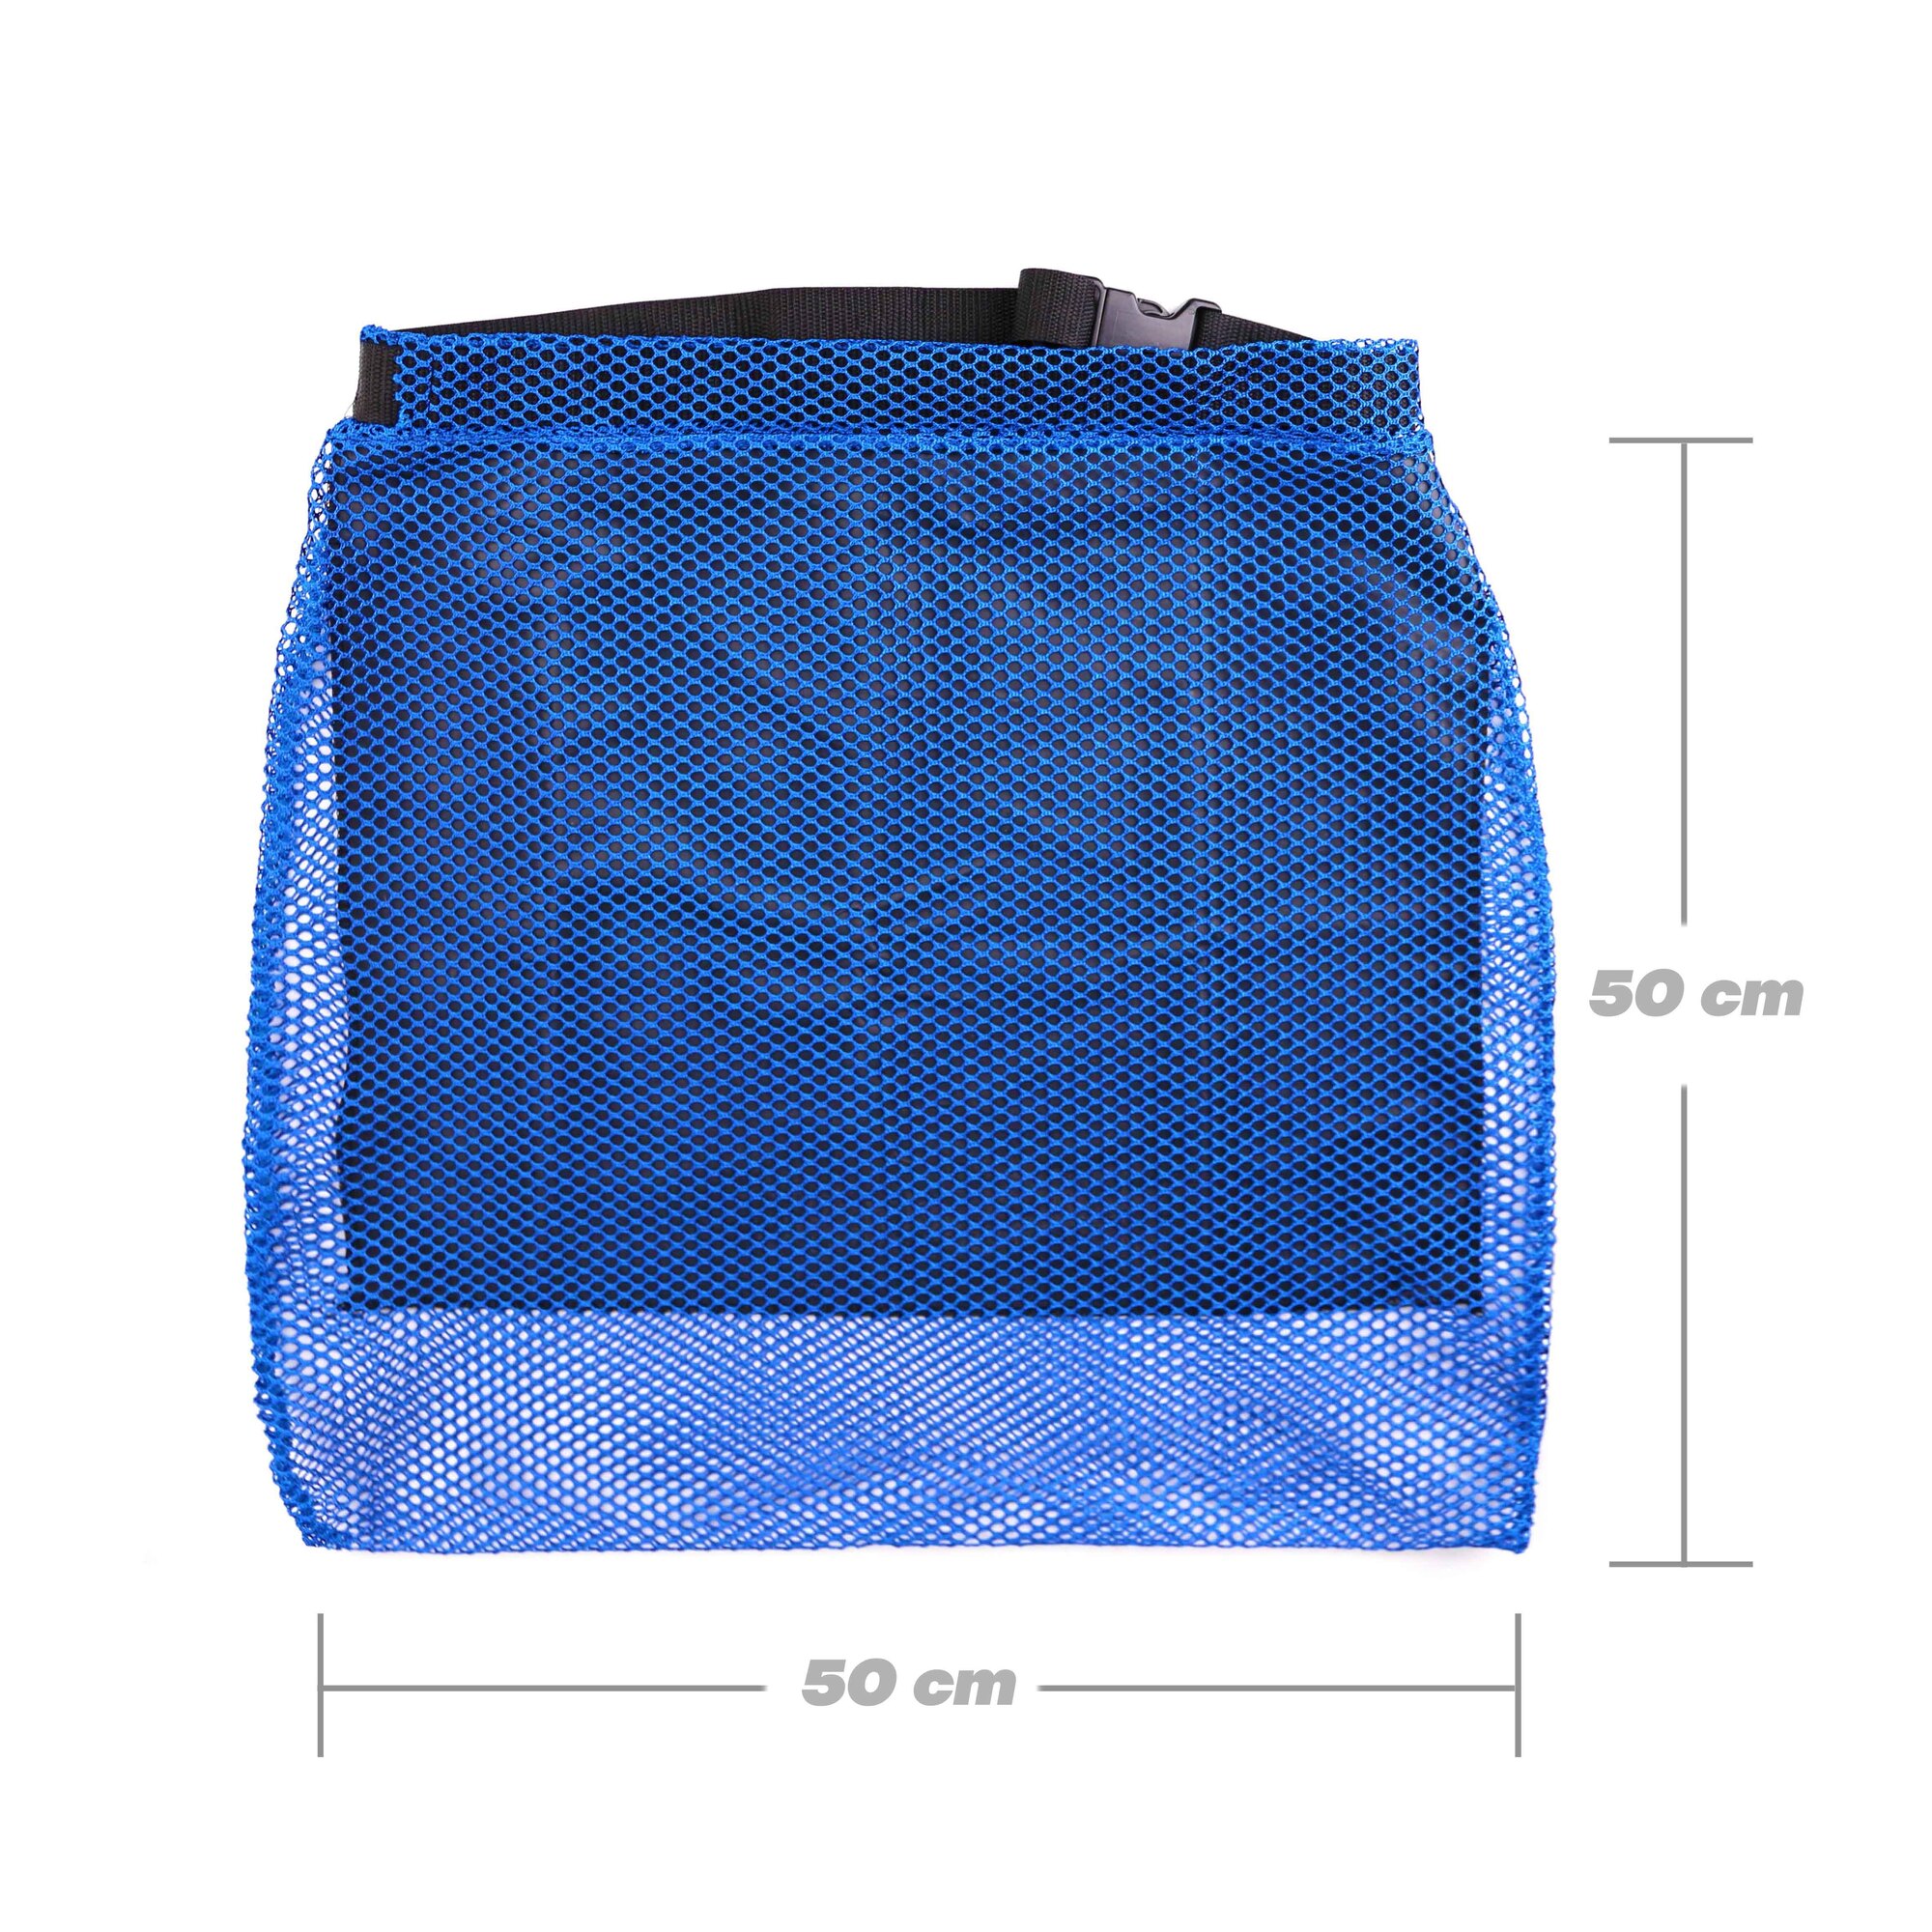 DivePRO Blue Large Size Cray Bag Waist Lobster Catch Bag with Waist Strap